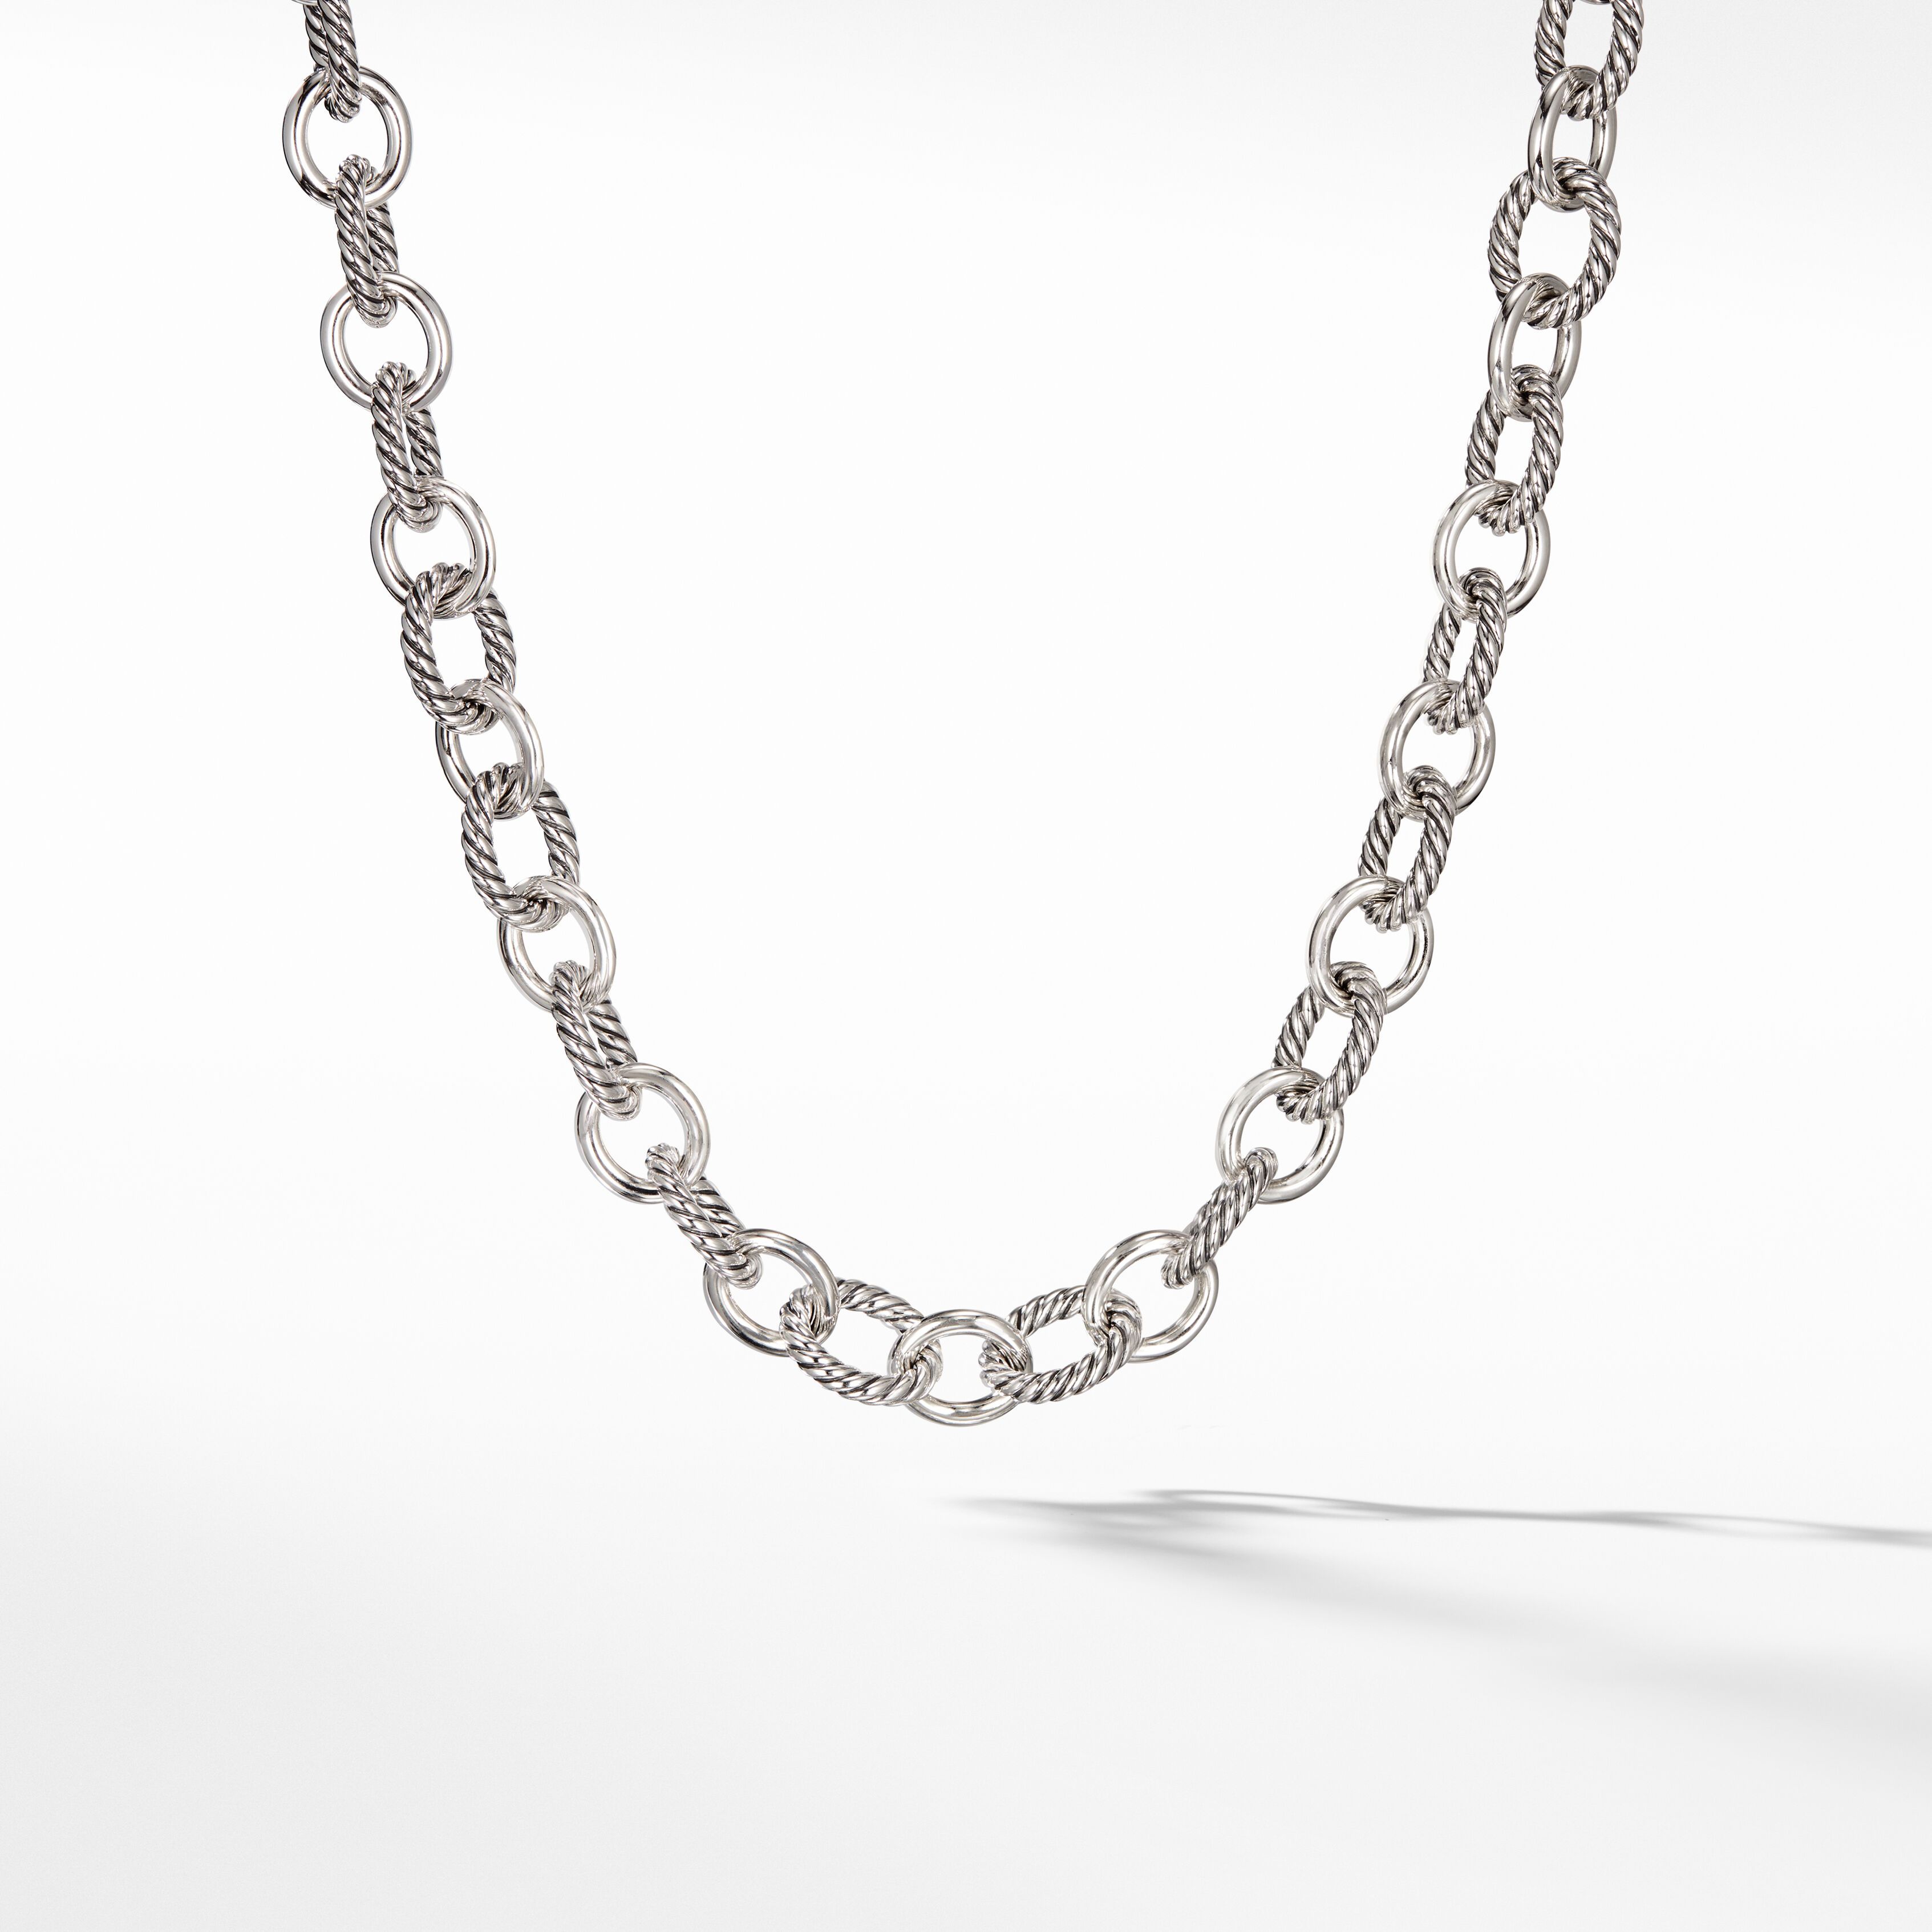 Oval Link Chain Necklace in Sterling Silver | David Yurman